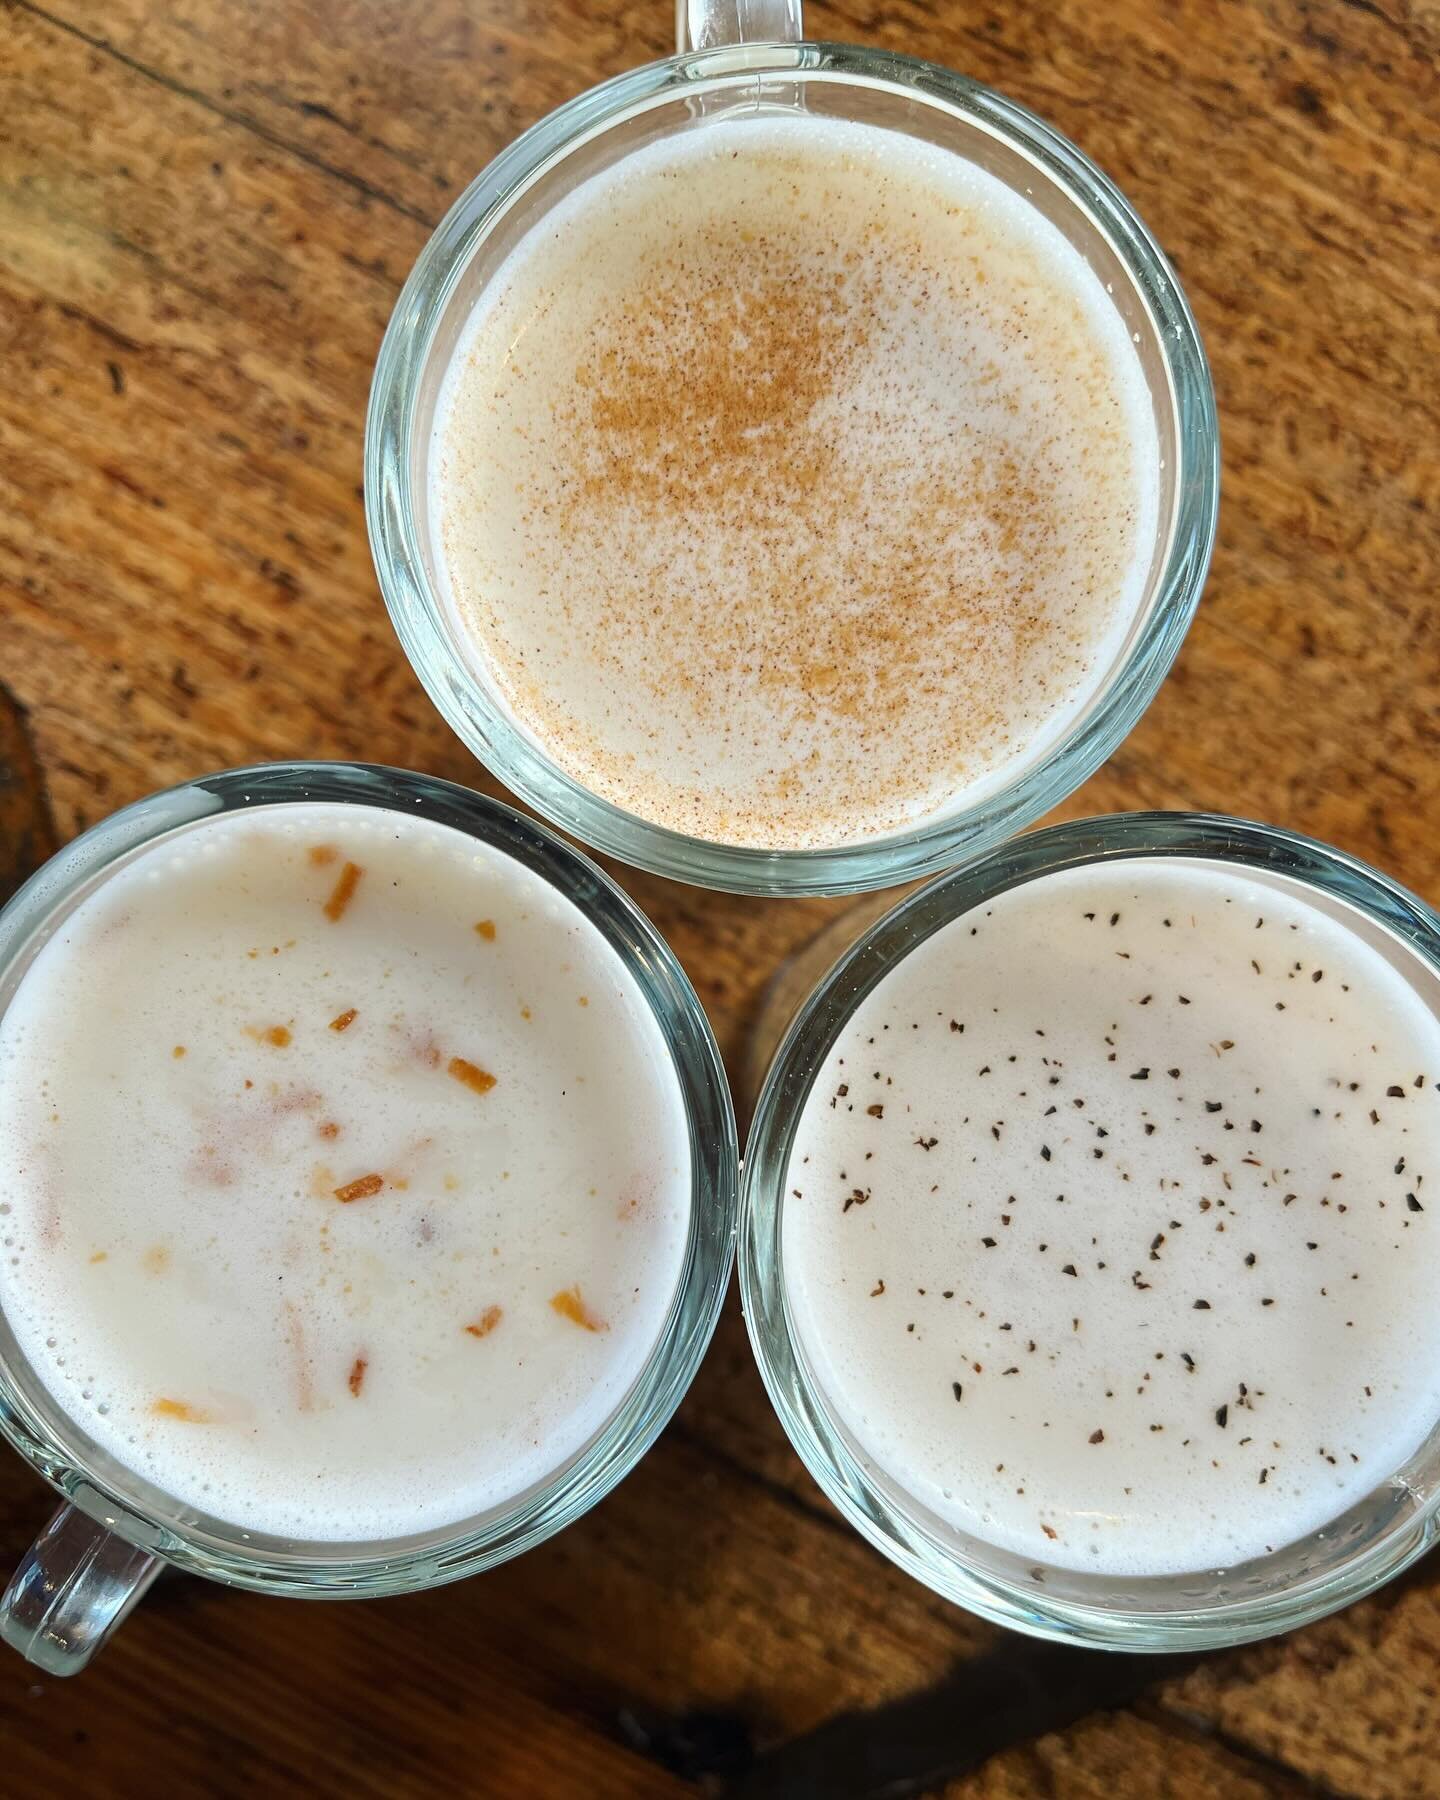 Are you ready Train Wreckers?! Hot Buttered Rum season starts&hellip;tomorrow! We have all of our mixes available for you to purchase for home and available to order here at the bar. 

In House Hot Buttered Rum Drinks:
▪️Coconut&mdash;Made with Malib